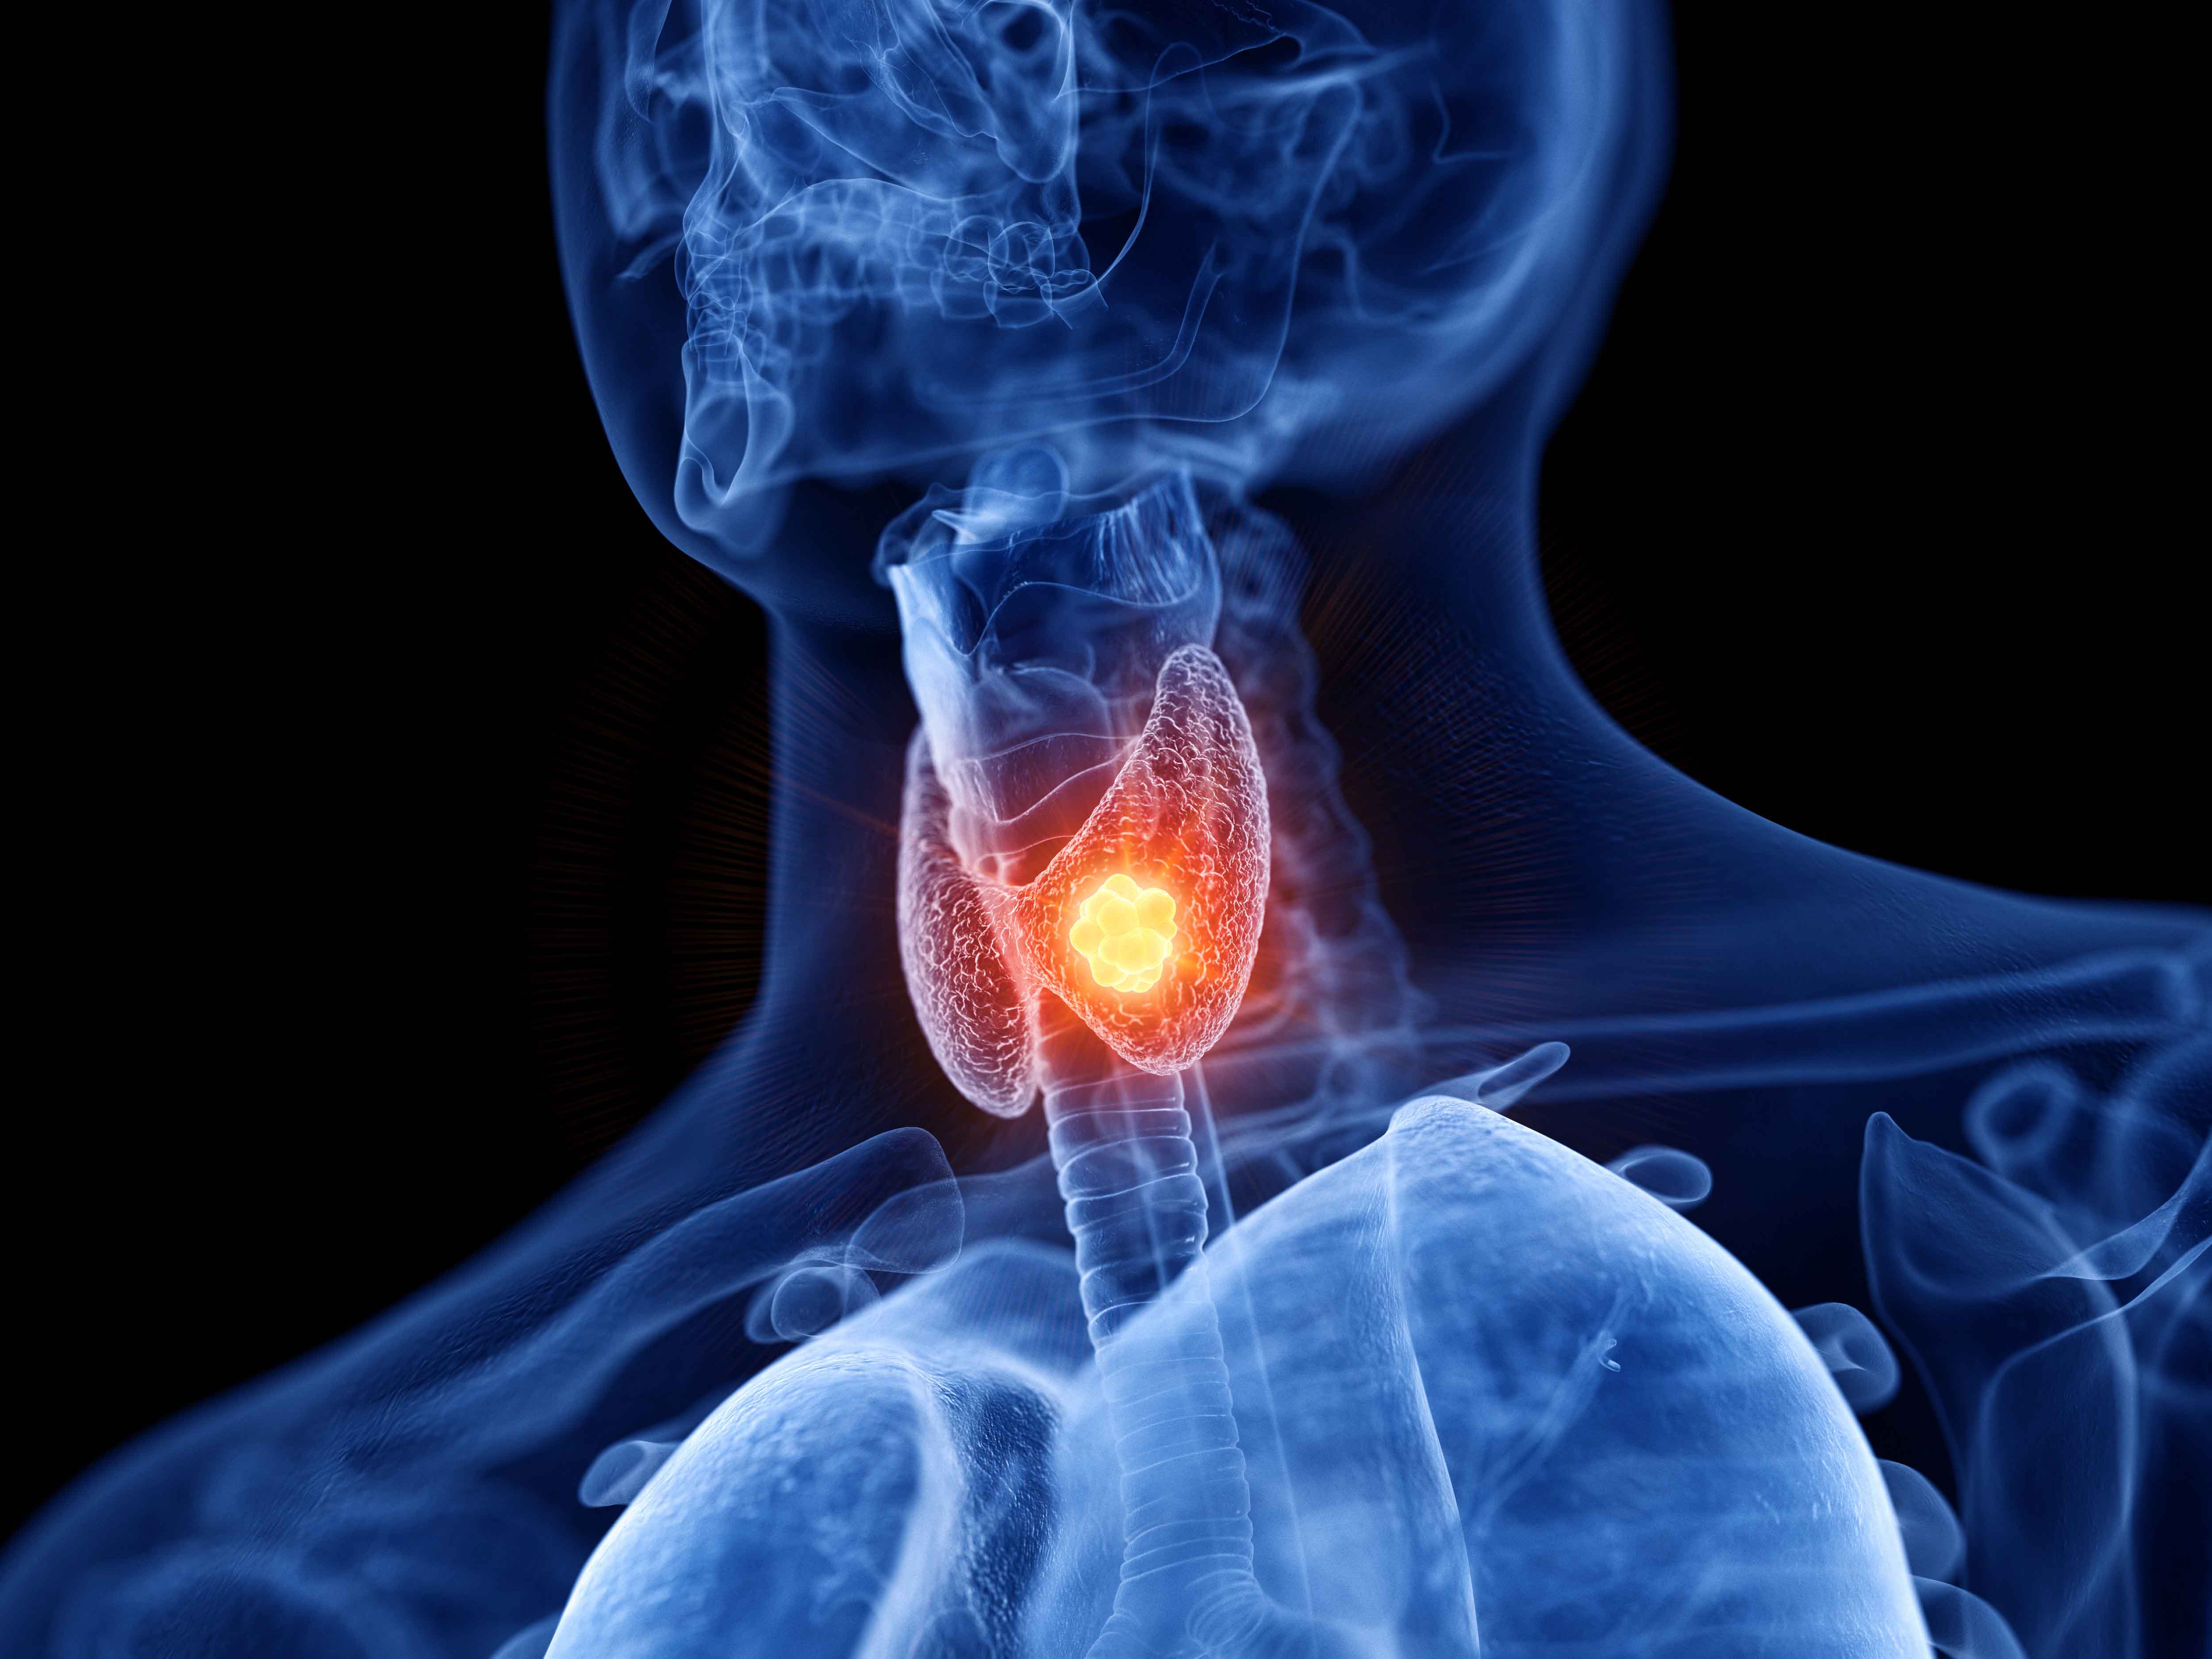 How an Abnormal Thyroid Affects Your Health